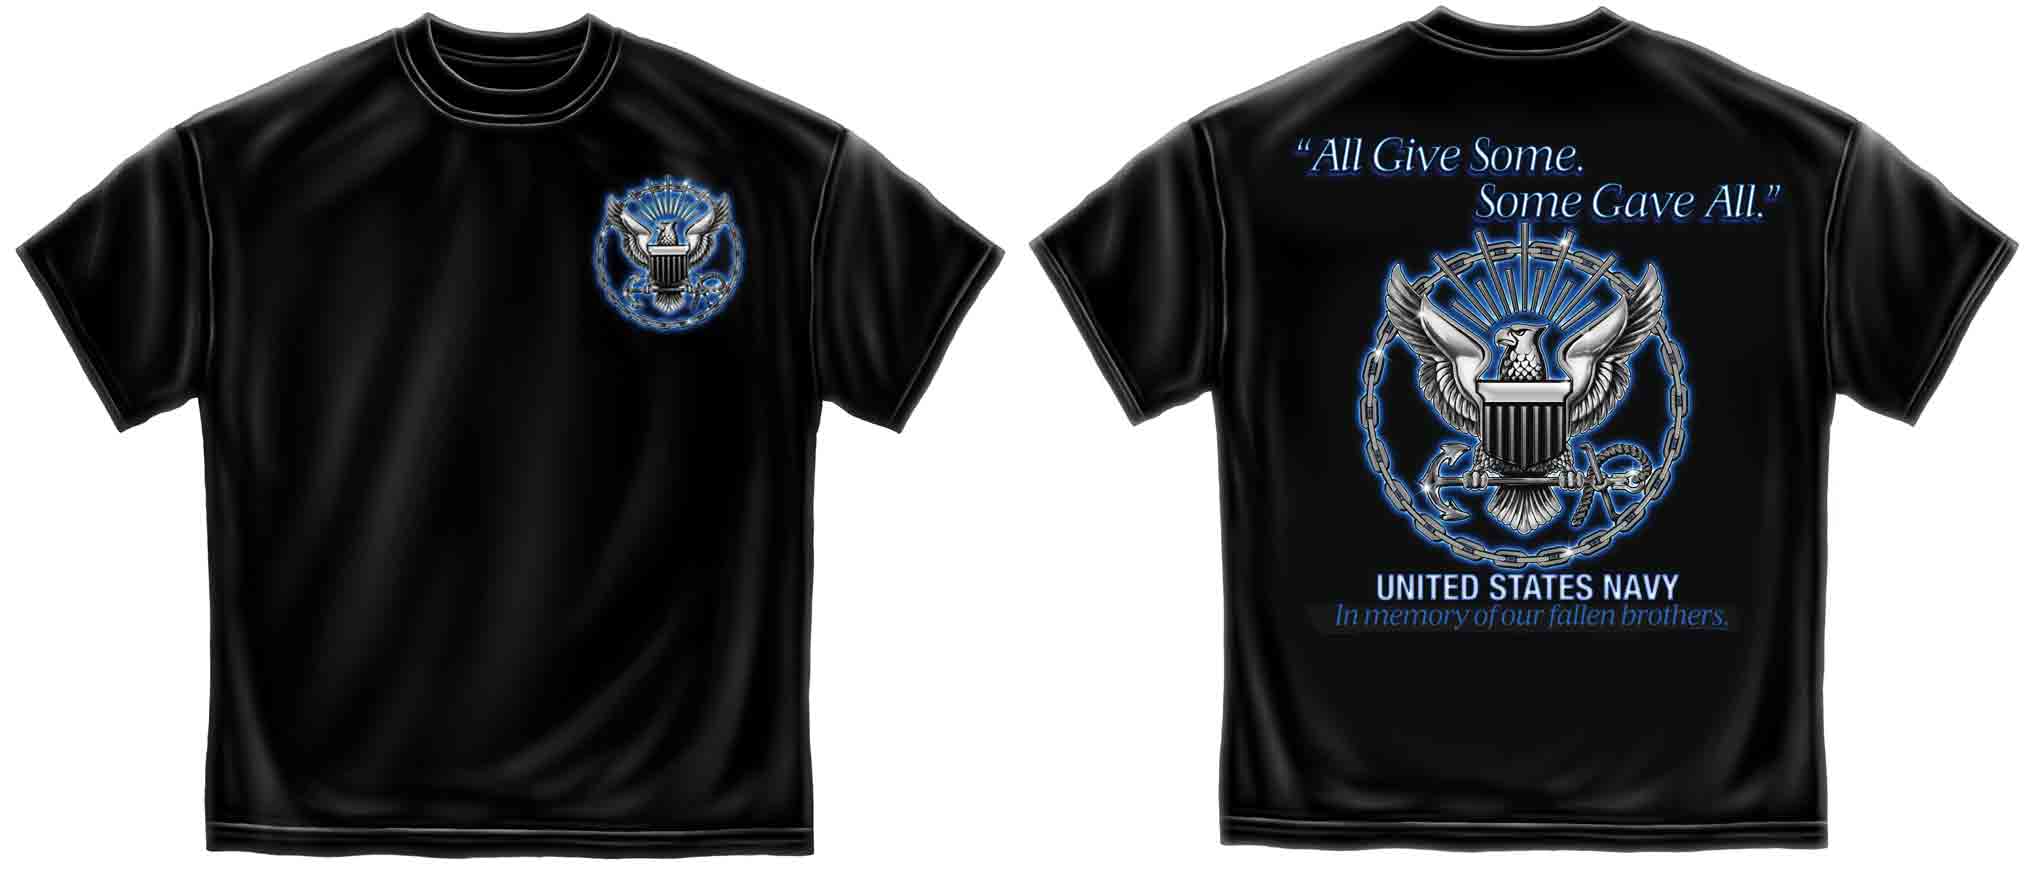 ALL GIVE SOME, SOME GAVE ALL, 100% COTTON TEES